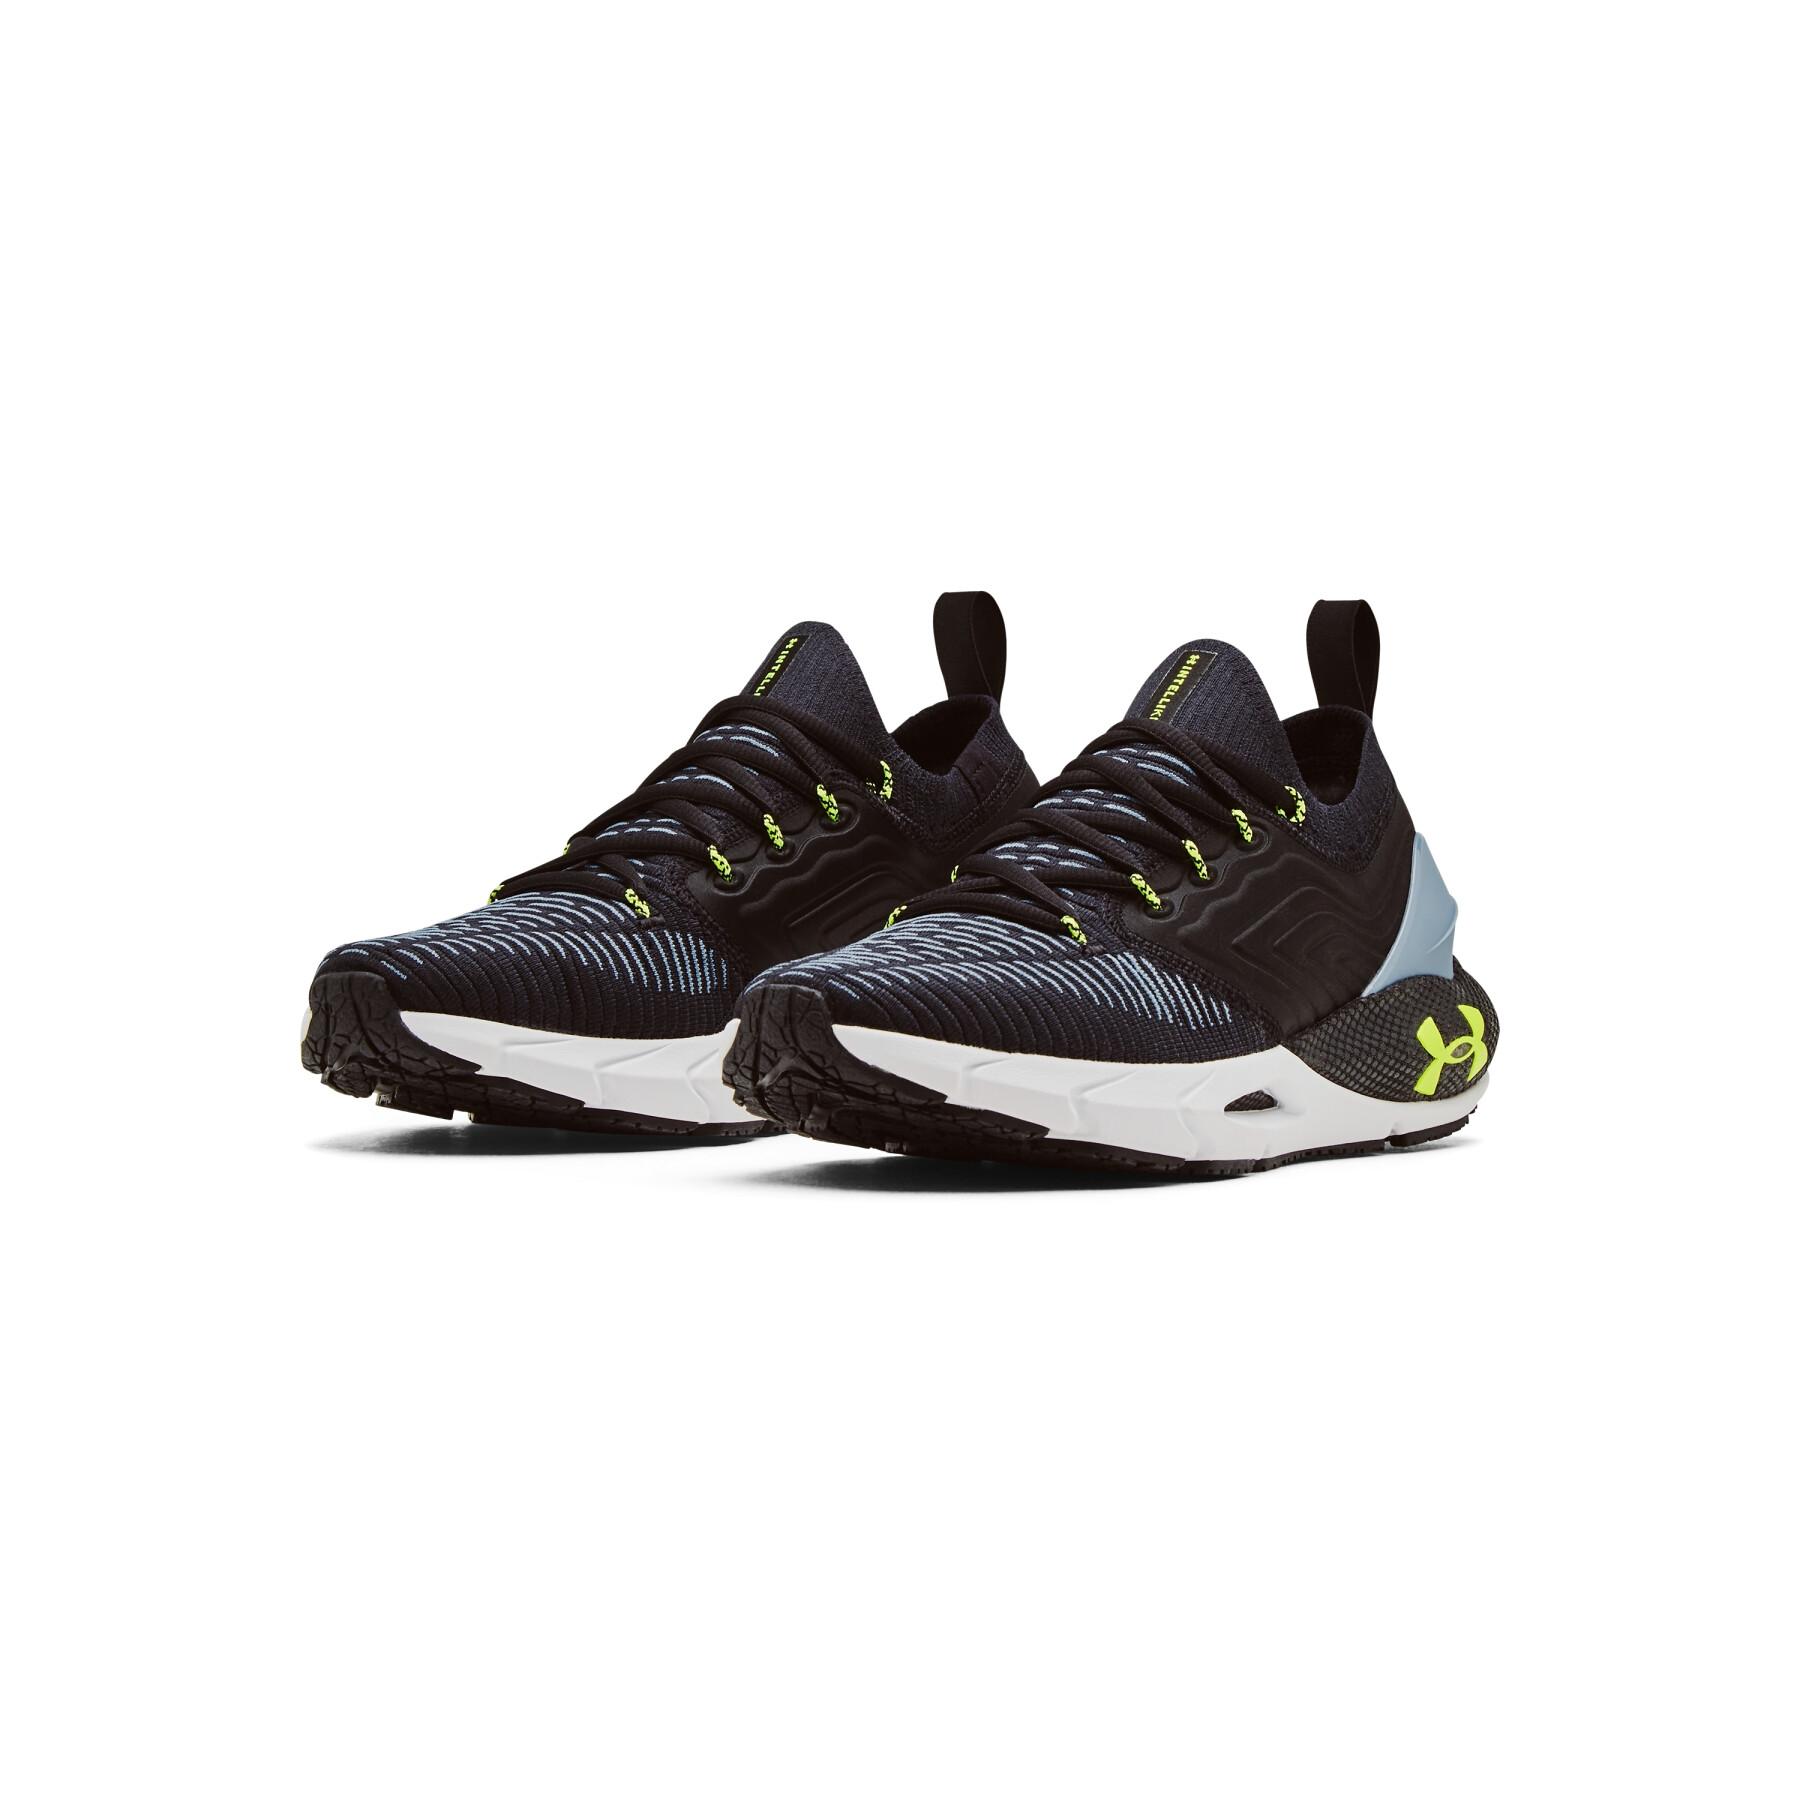 Running shoes Under Armour Hovr Phantom 2 Inknt